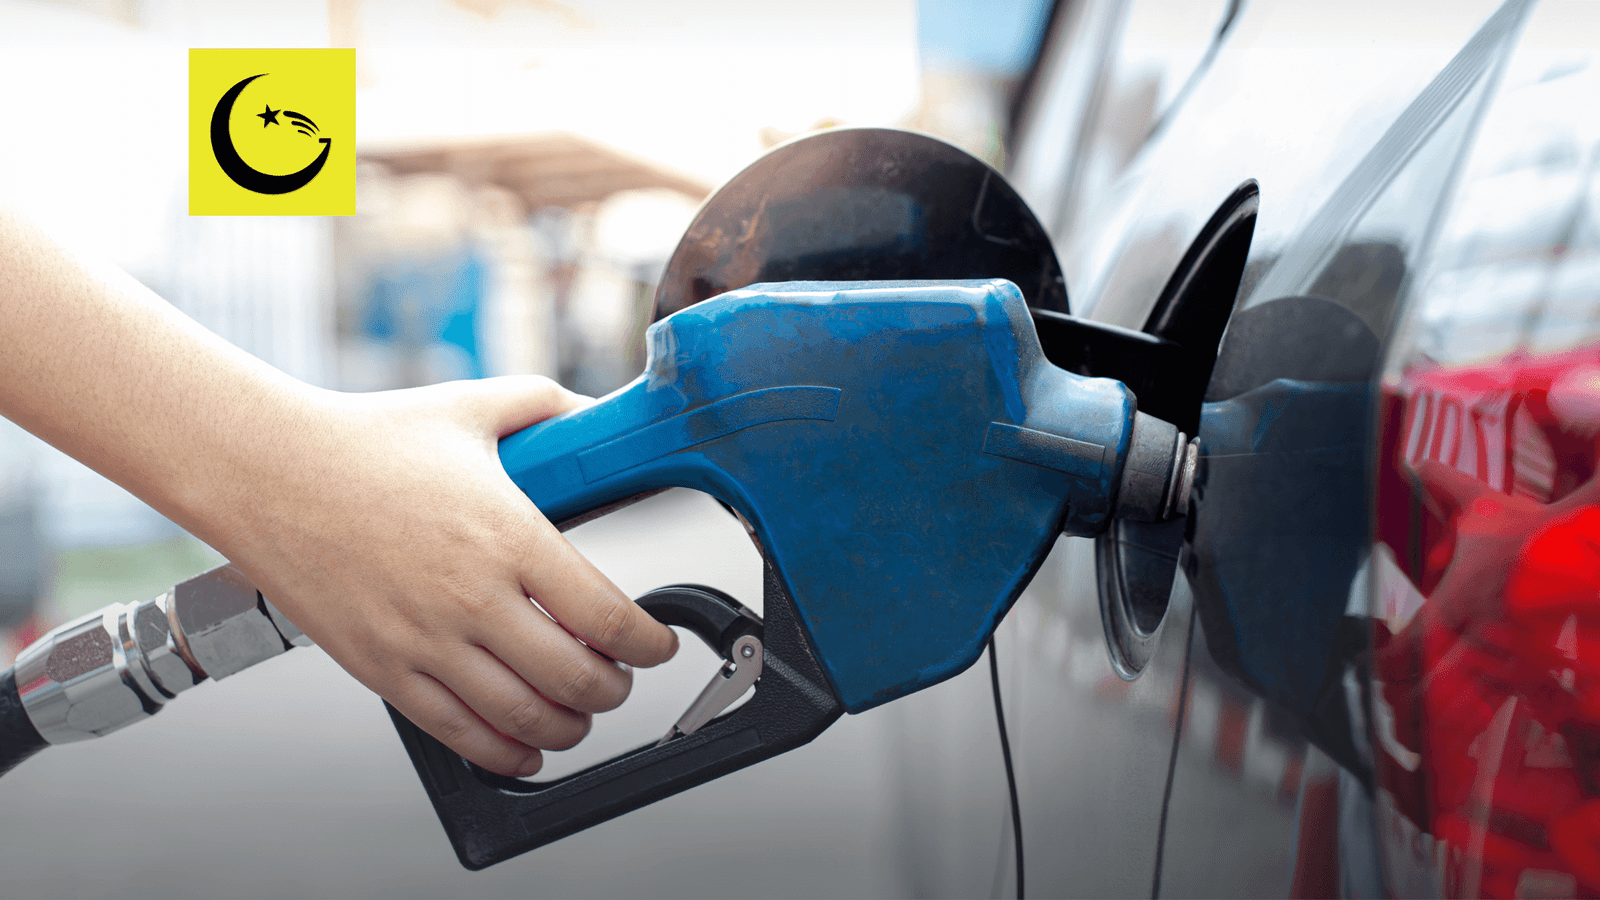 Petrol relief package for low-income motorists - Good News Pakistan